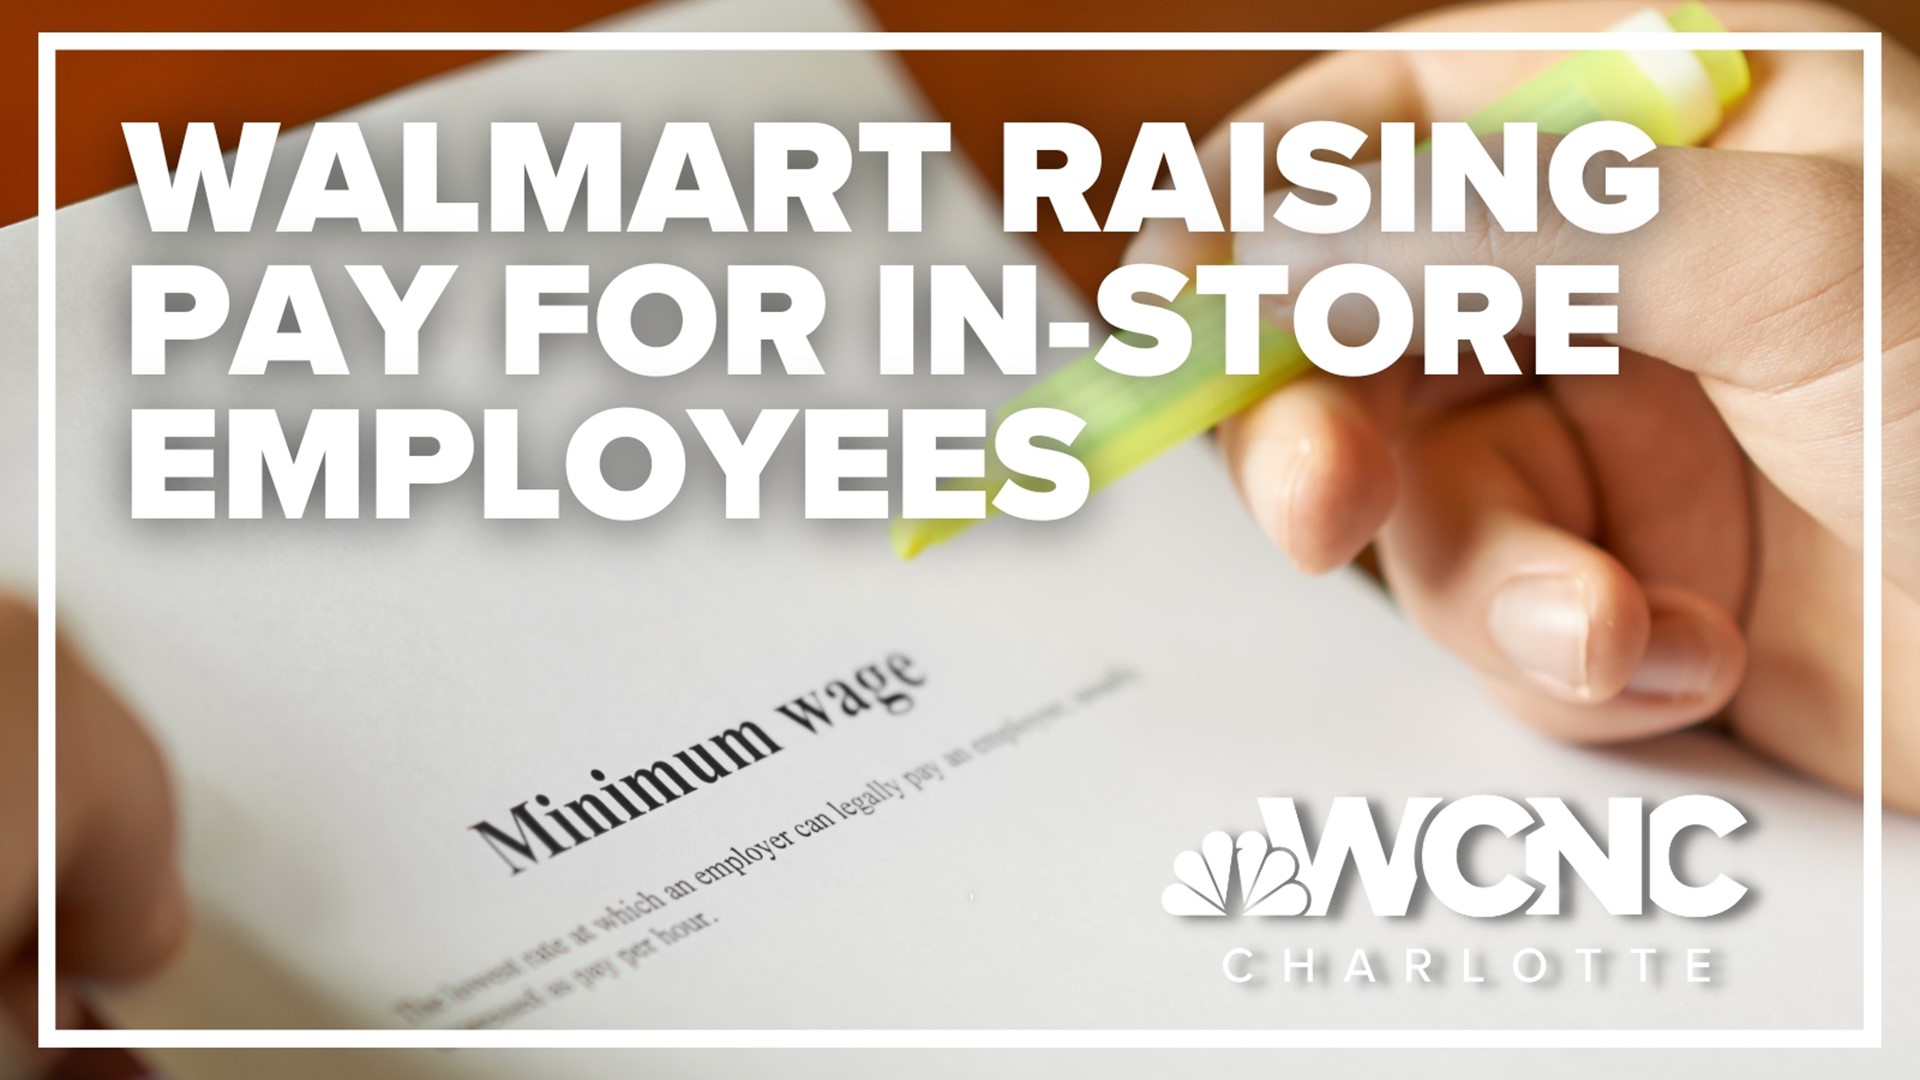 Starting in March, in-store employees will earn between $14 and $19 an hour.